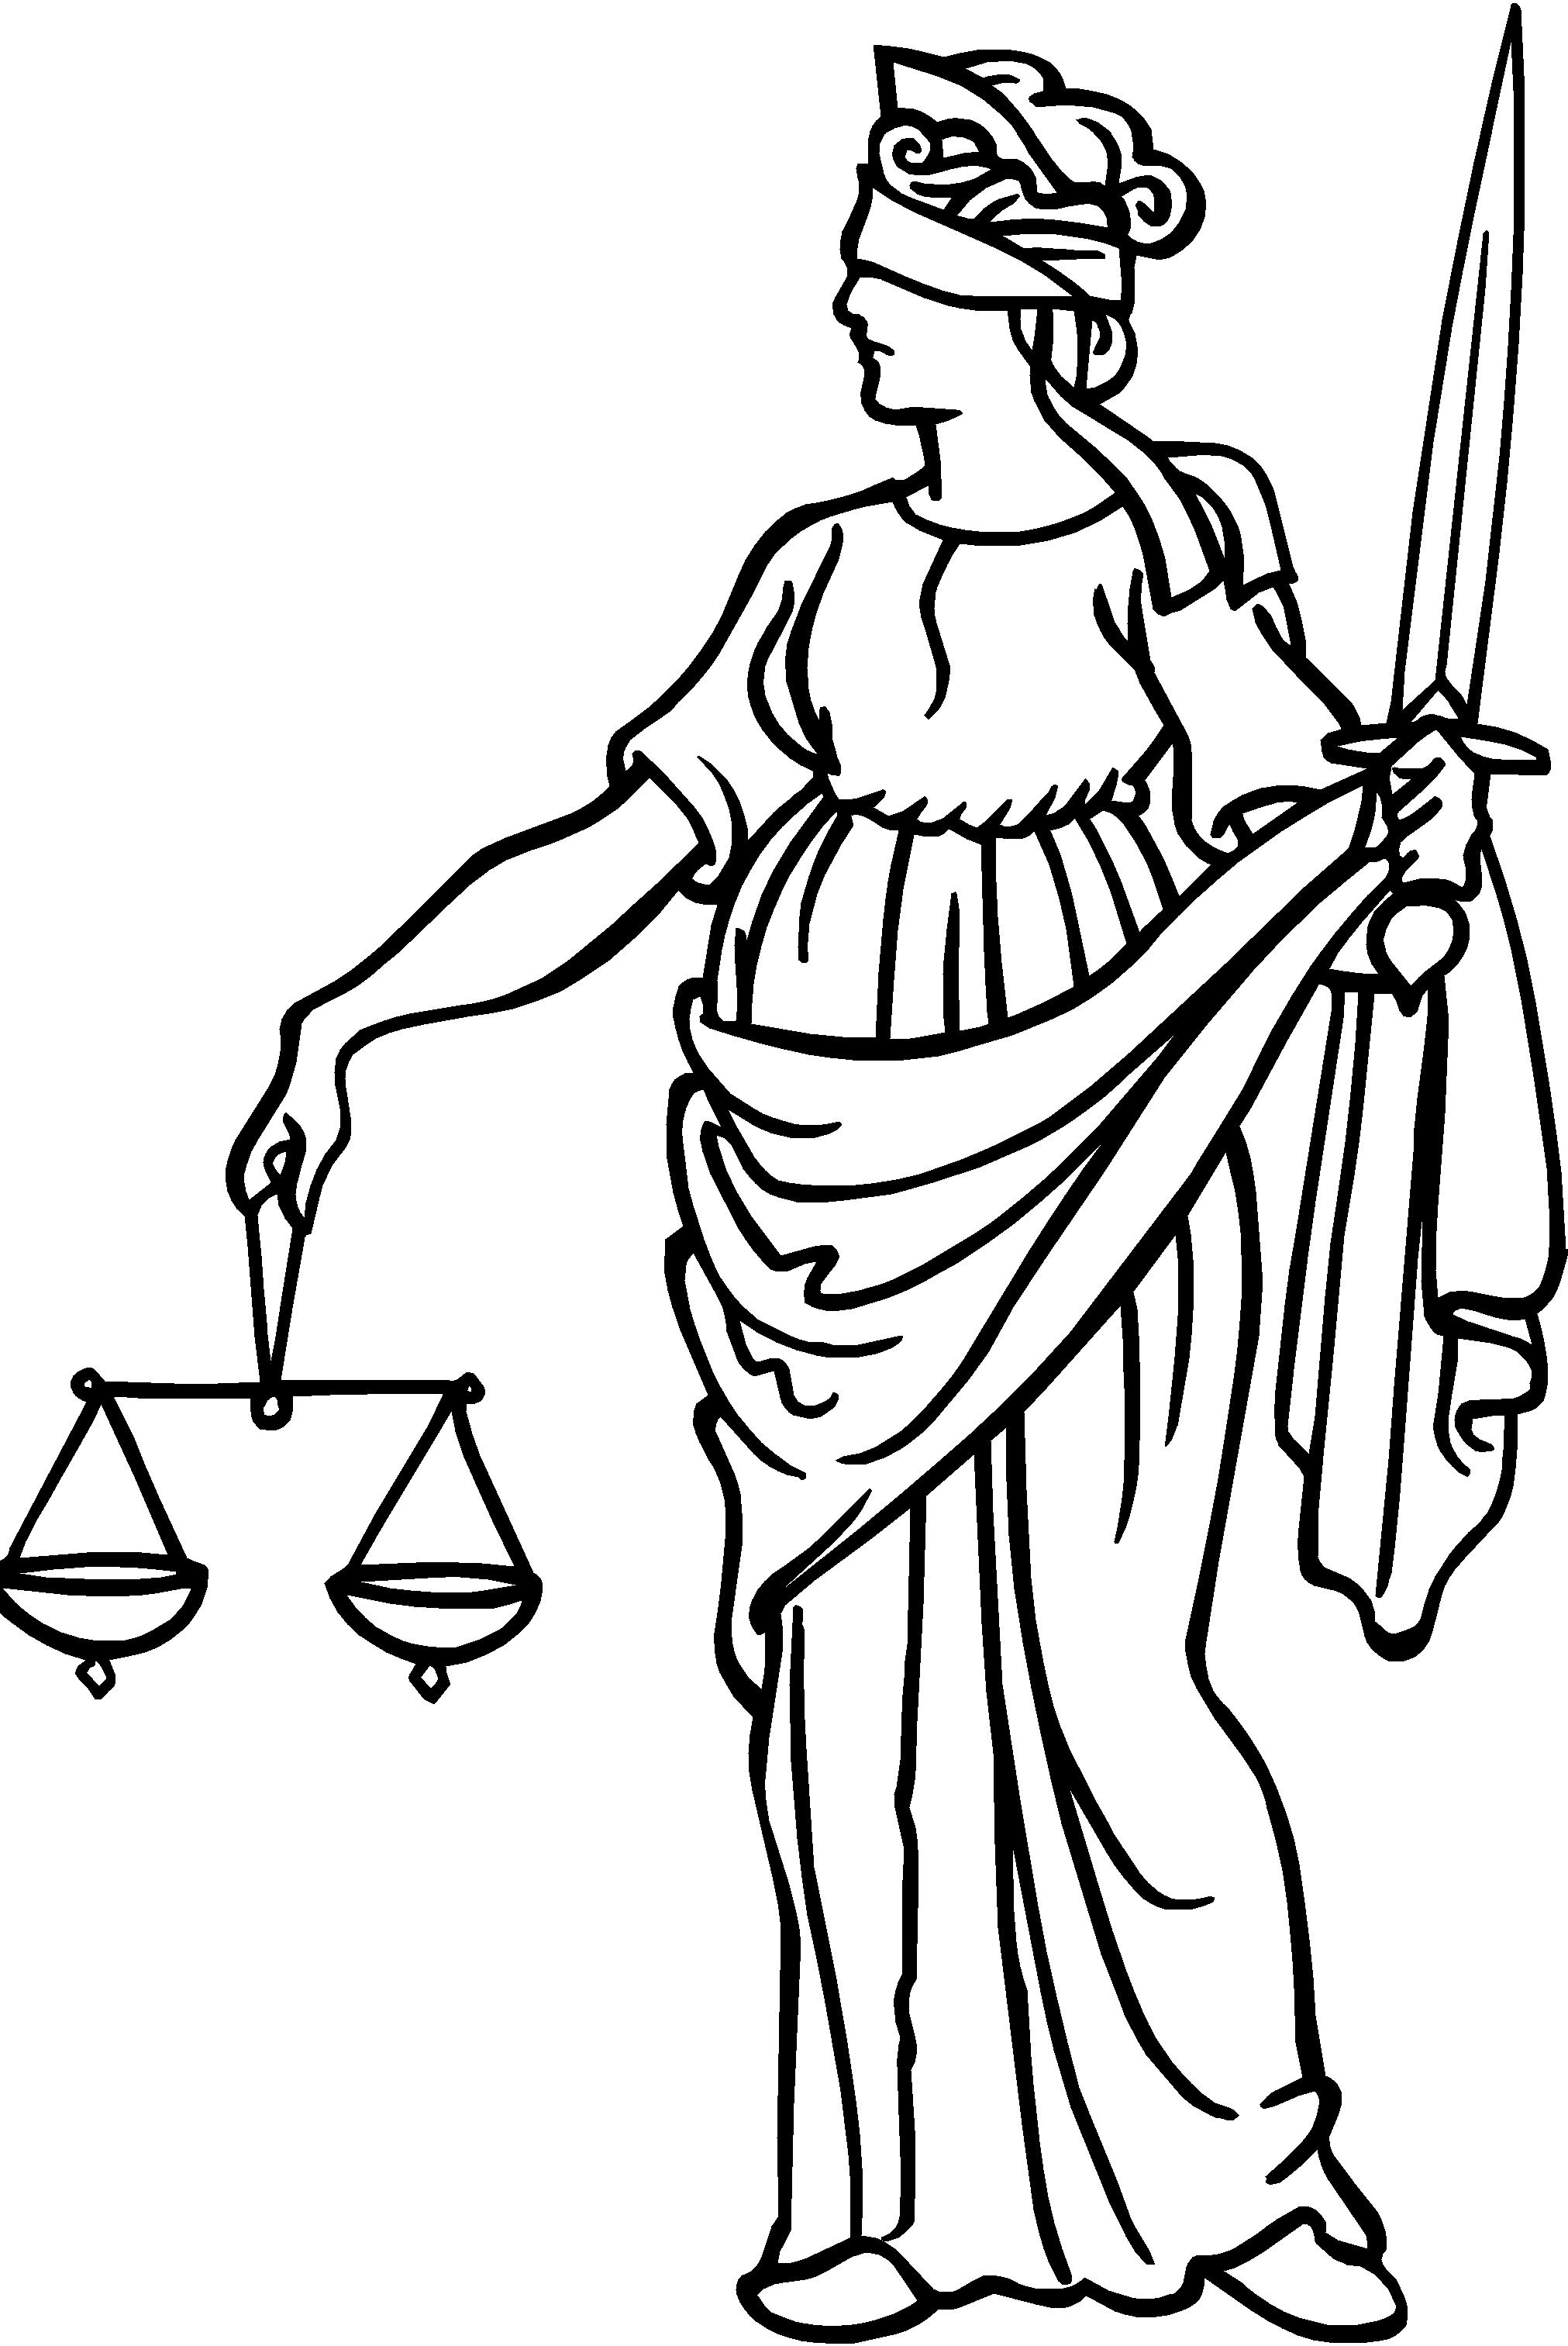 Free clip art scales of justice